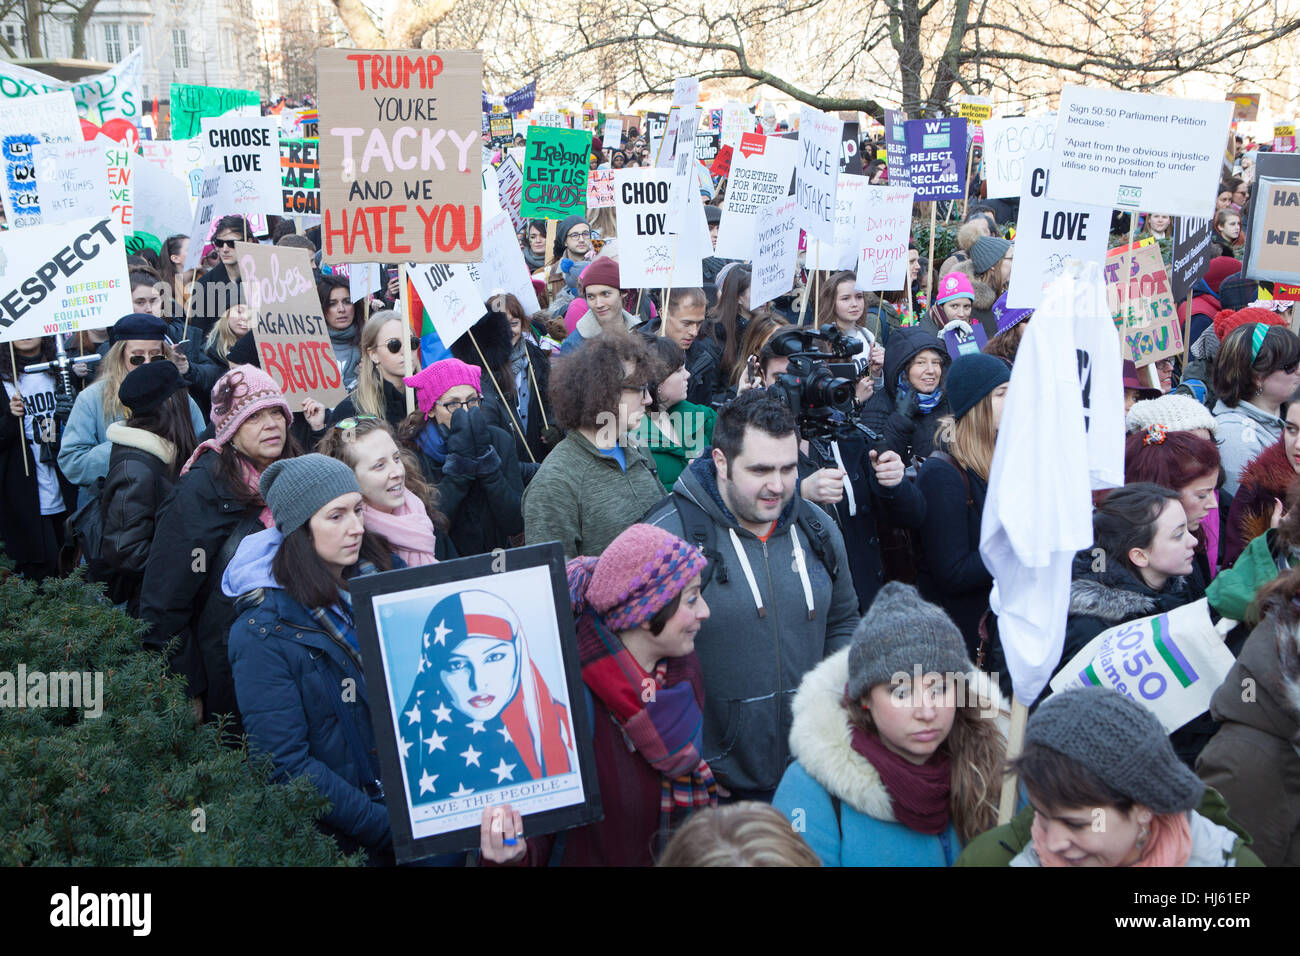 London, UK. 21st January, 2017.Protestors on Women's March marching through streets of London holding placards. Credit: Alan Gignoux/Alamy Live News Stock Photo